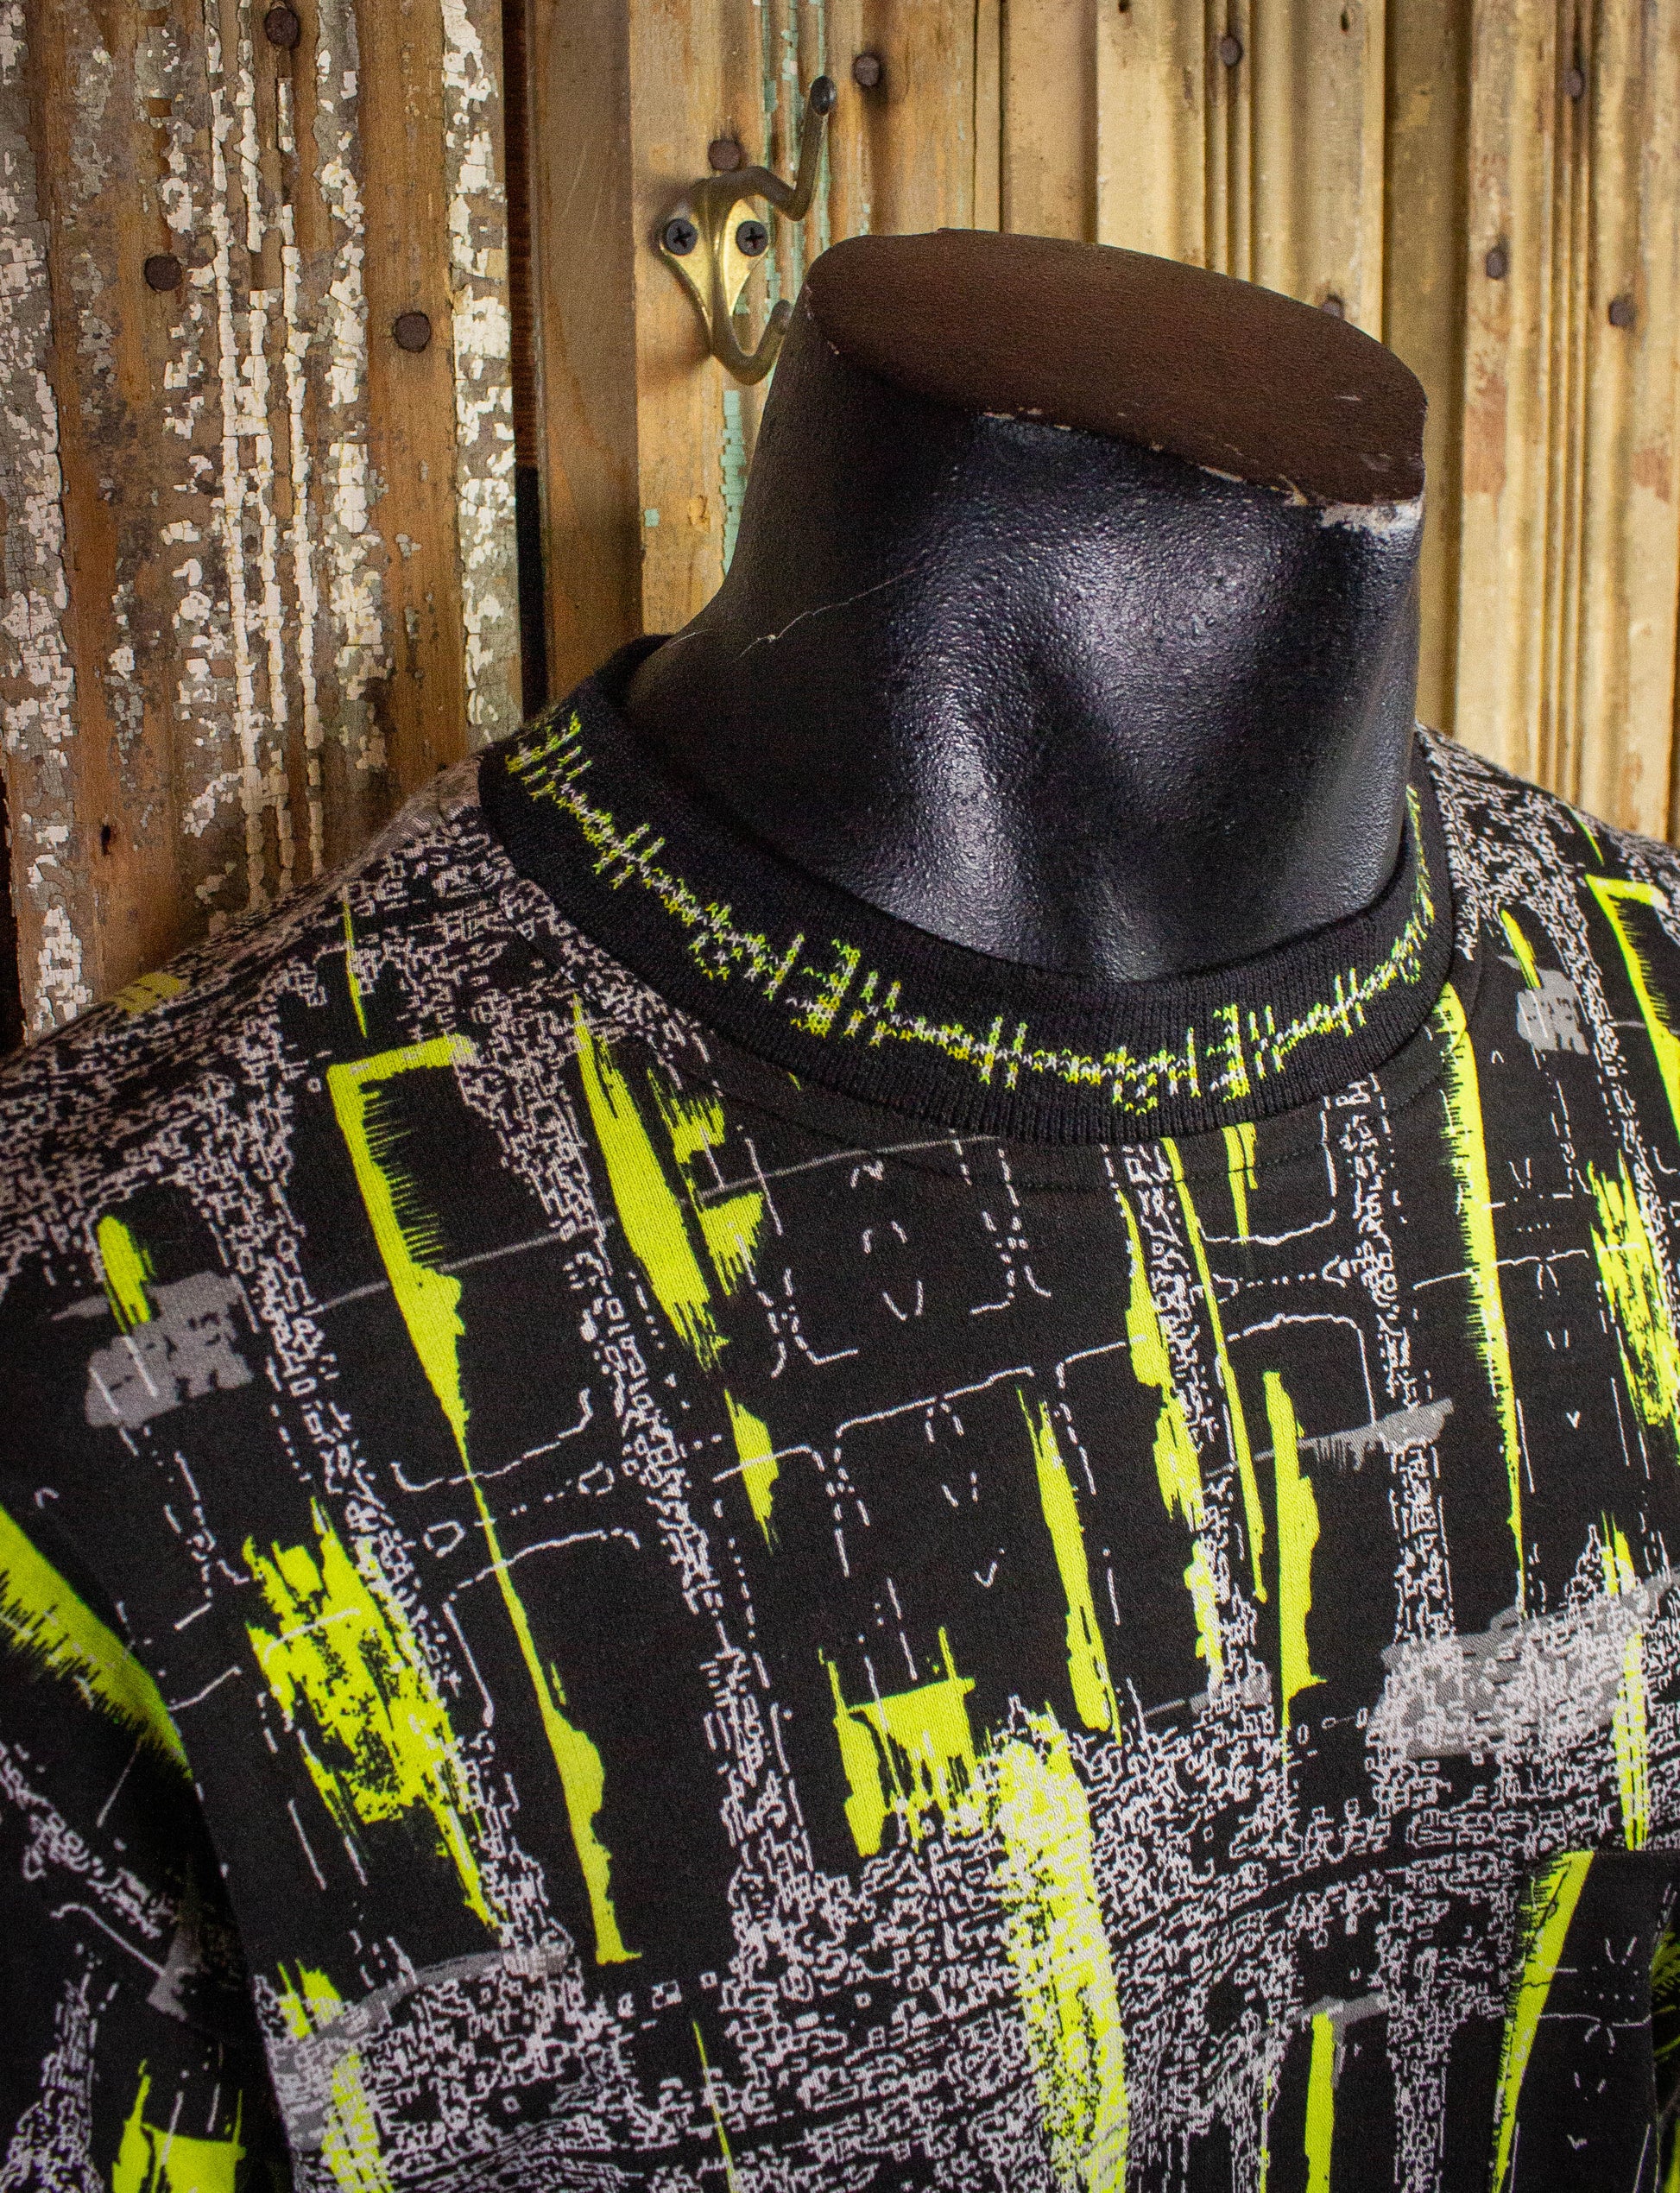 Vintage New Planet Patterned Long Sleeve Skater Shirt 80s/90s Yellow and Black Medium